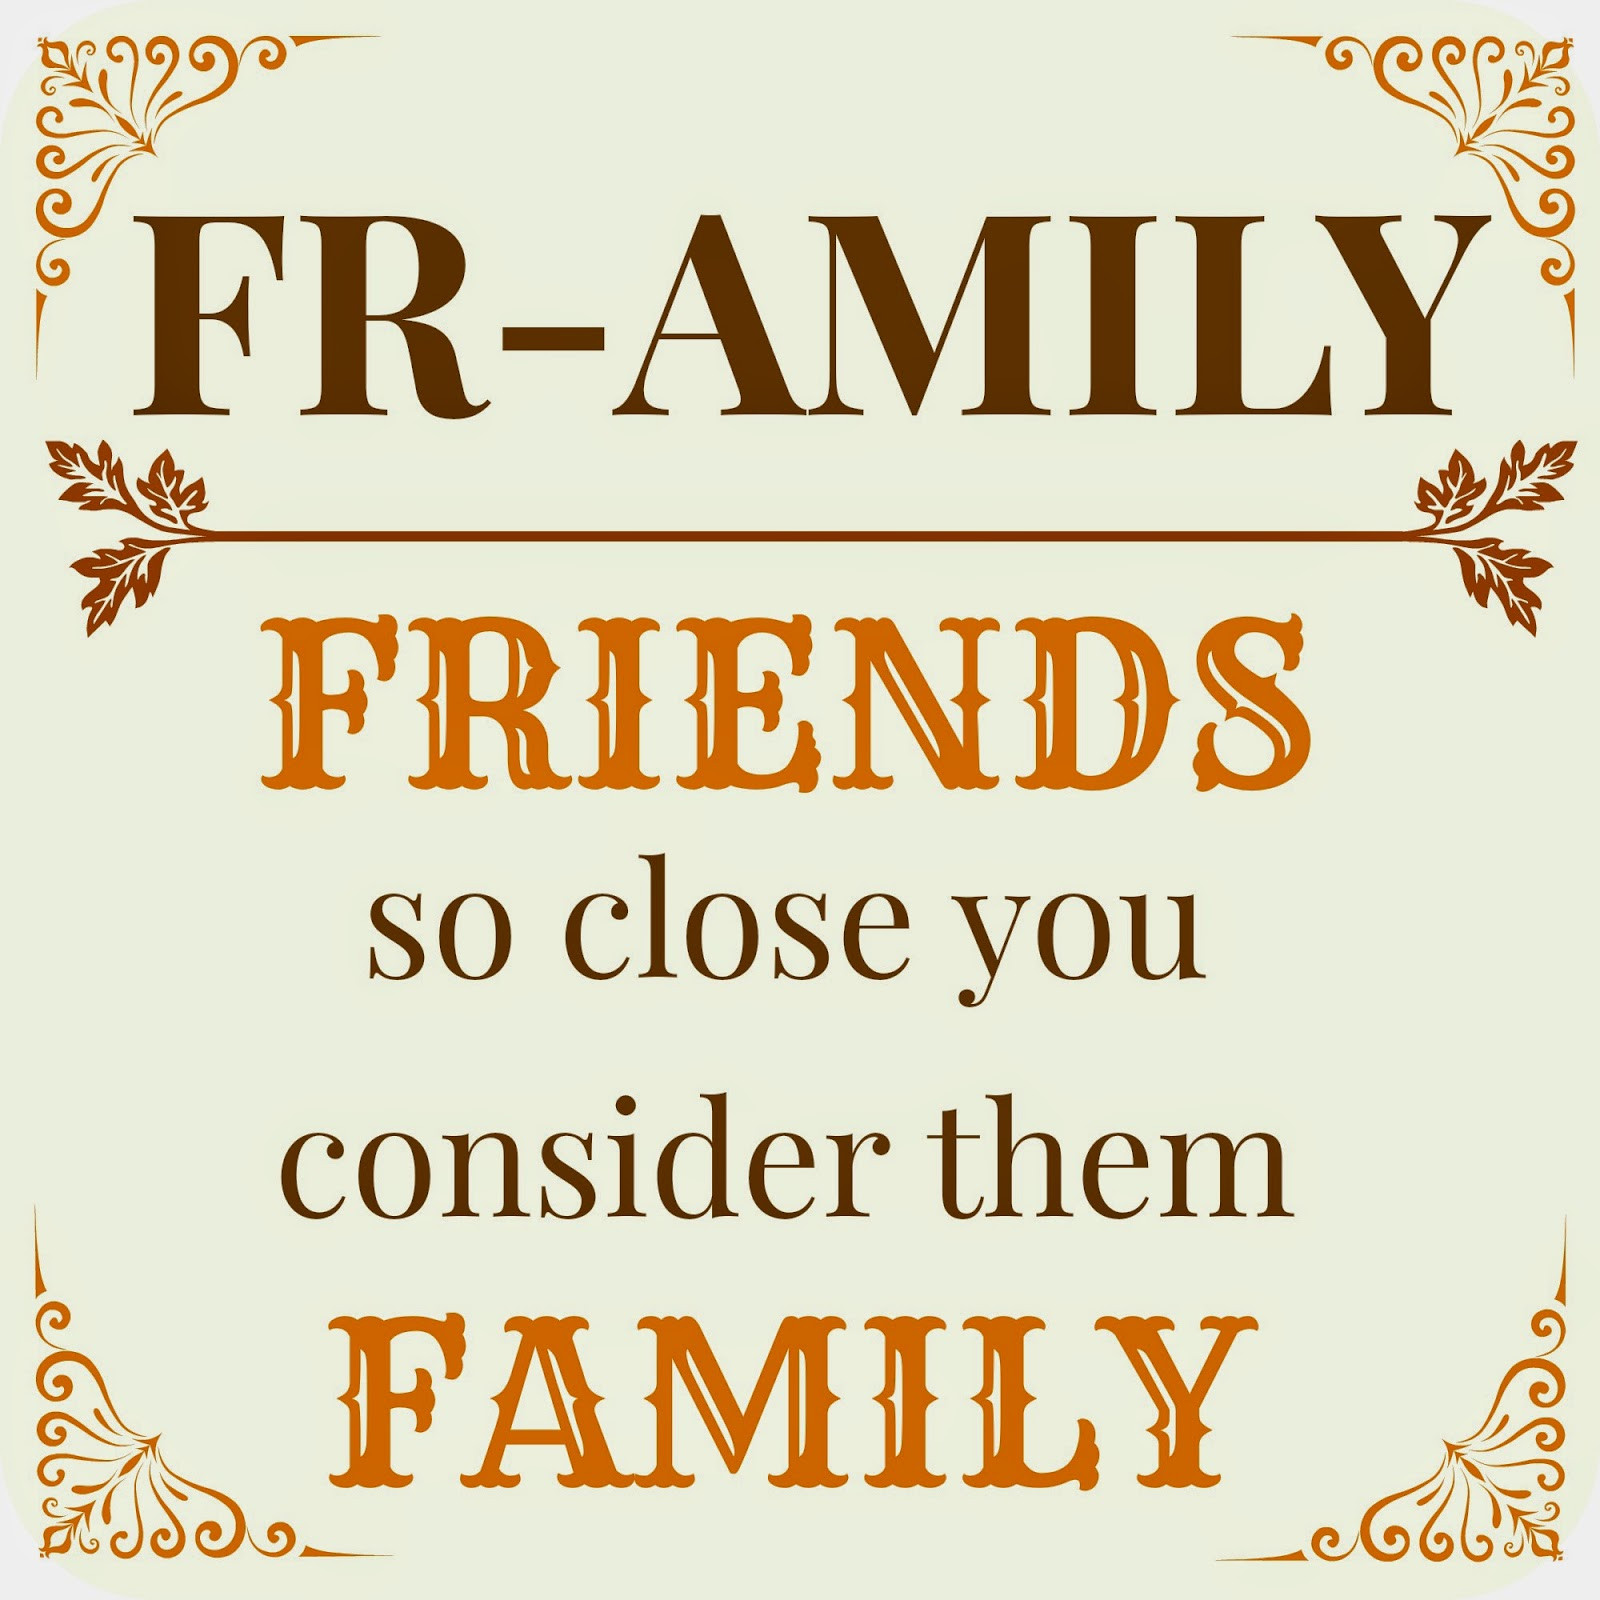 Friends Becoming Family Quotes
 Quotes About Friends Considered Family QuotesGram